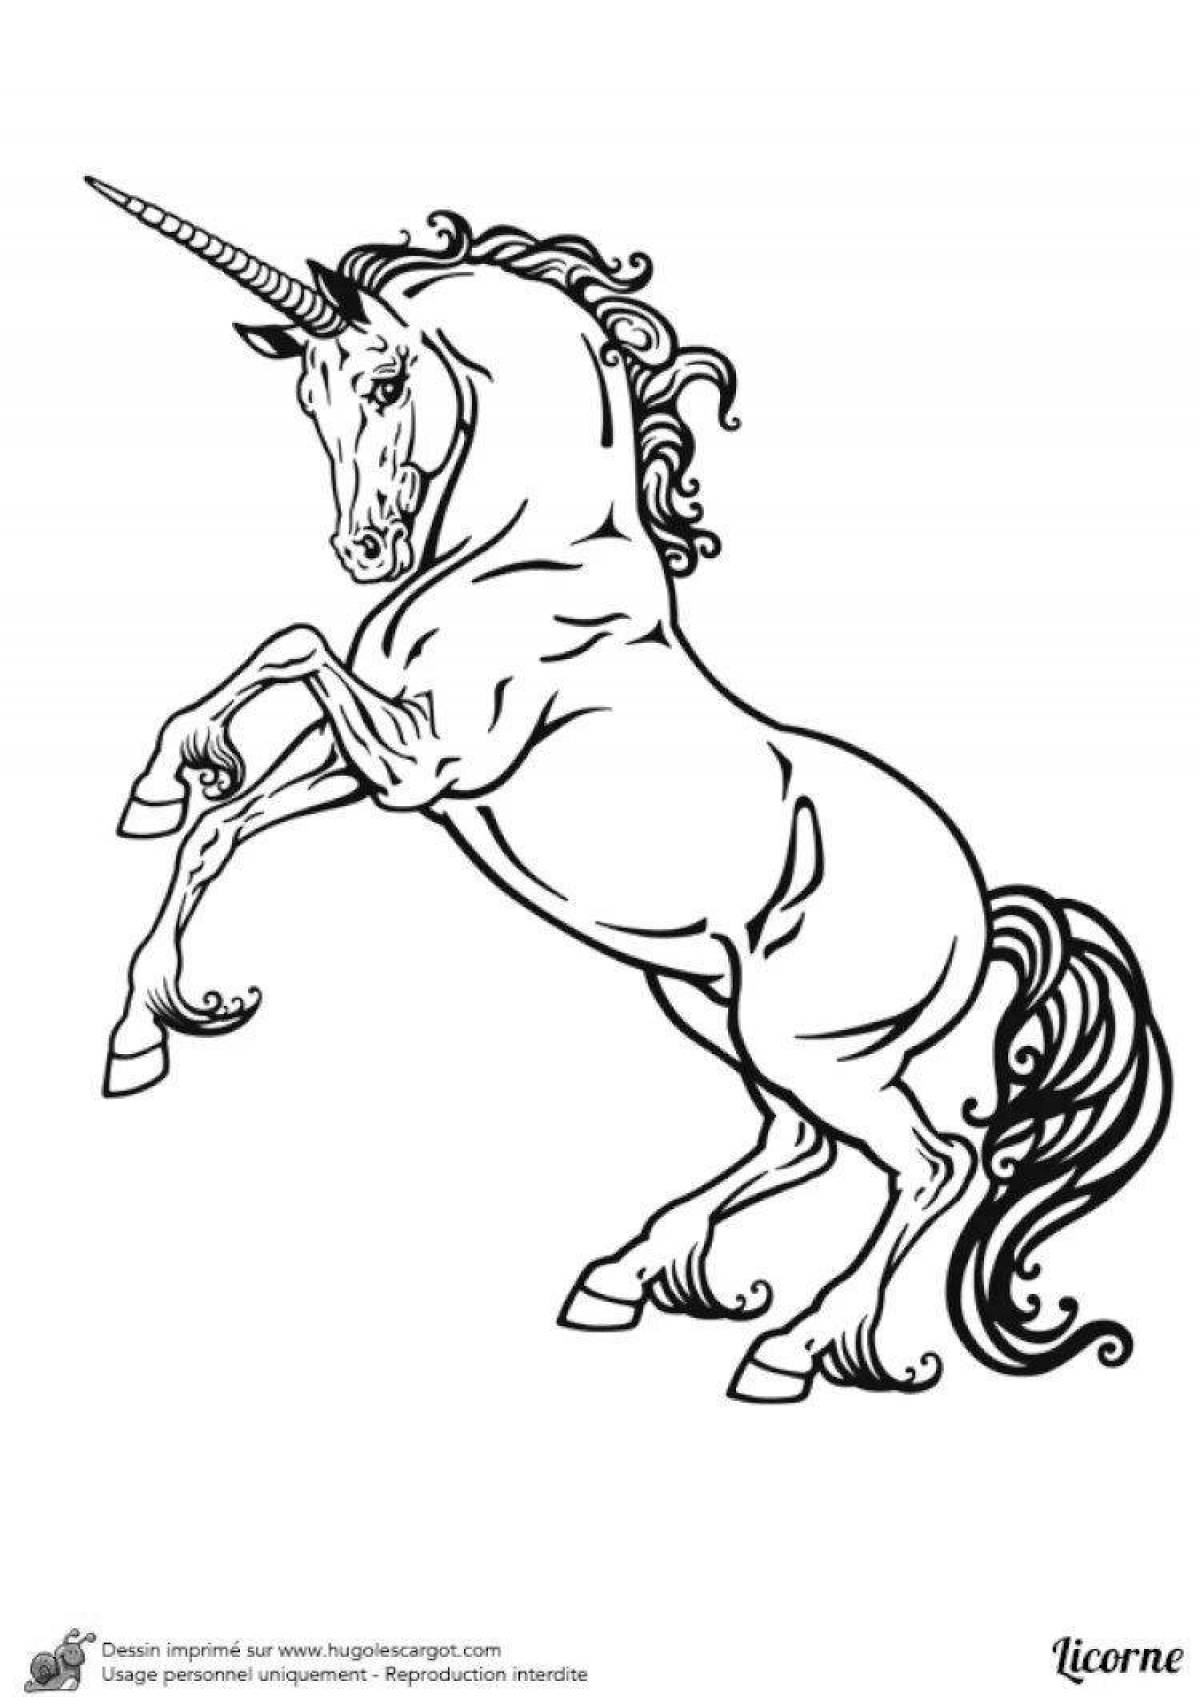 Coloring page dazzling rearing horse